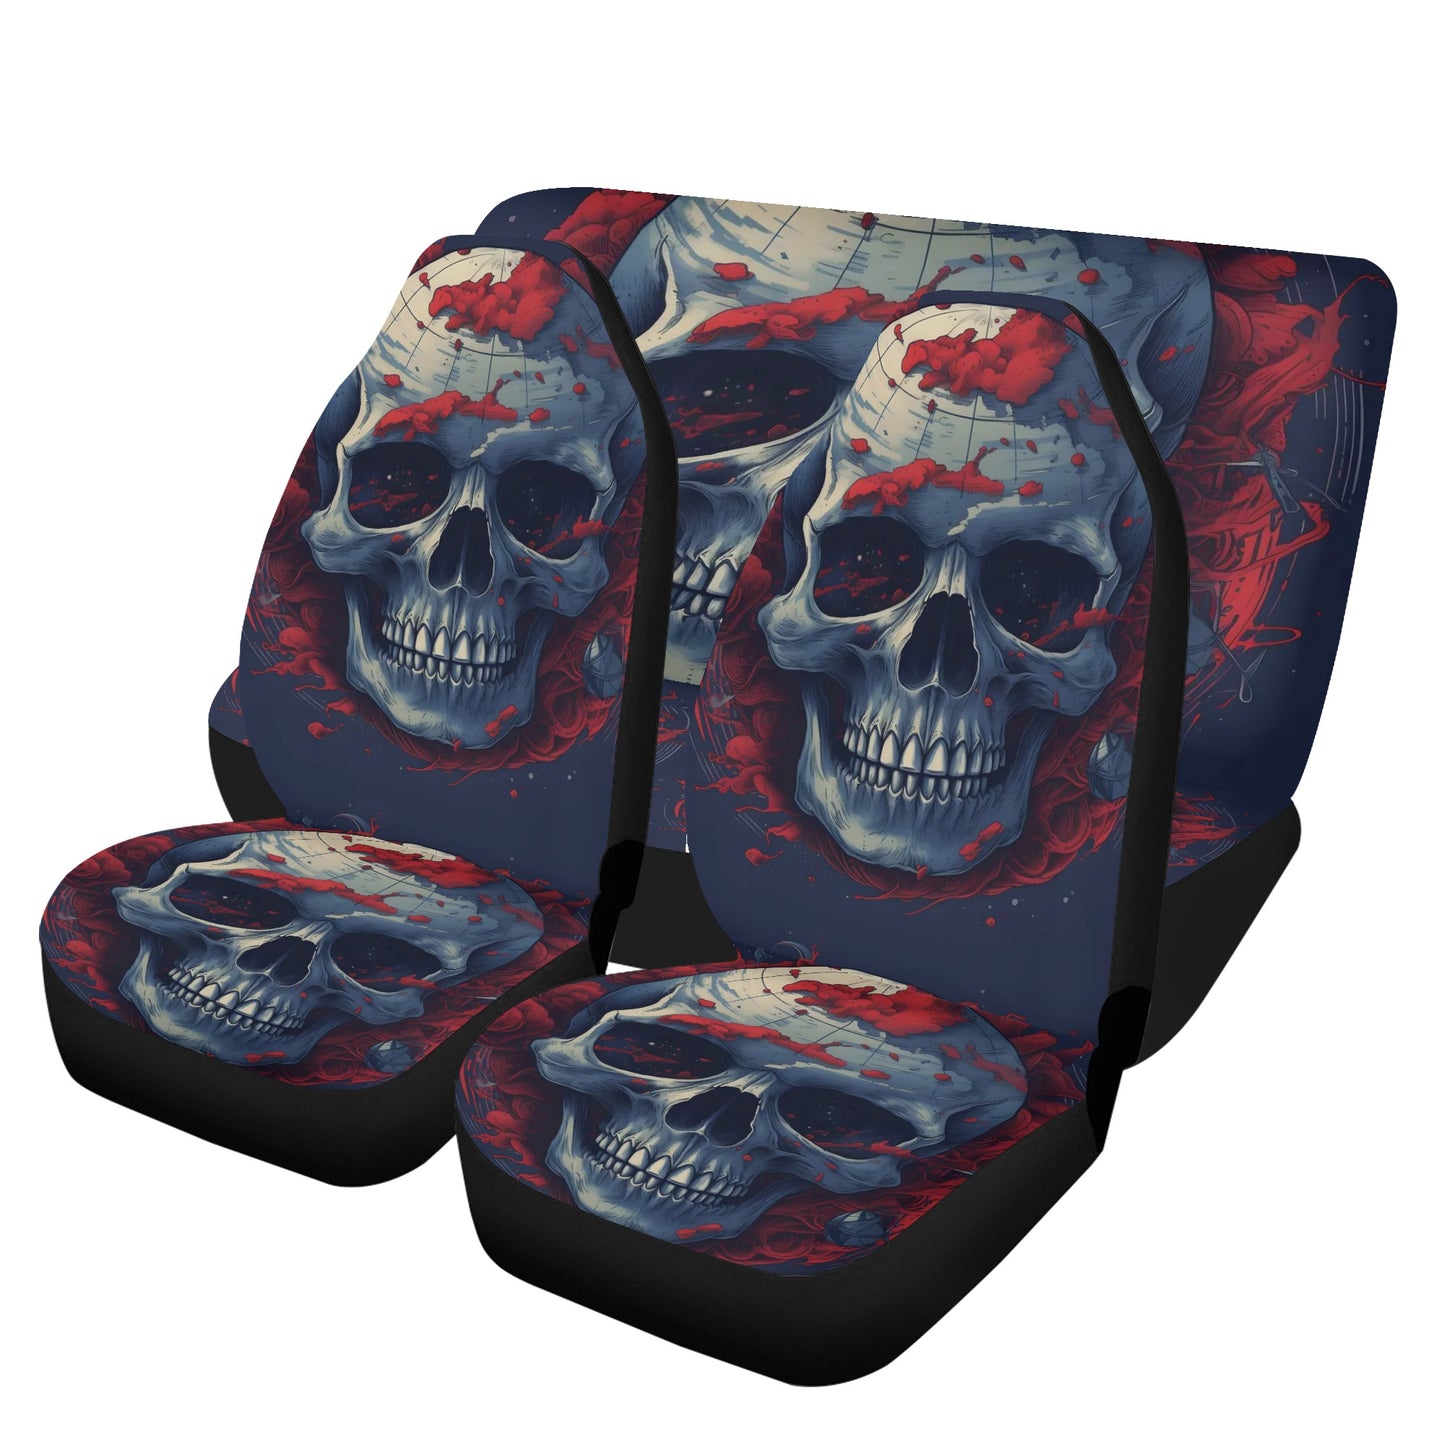 Gothic skull mat for car, skull in fire cover cushion accessories for Cars, evil washable car seat covers, flower skull floor mat for car, s